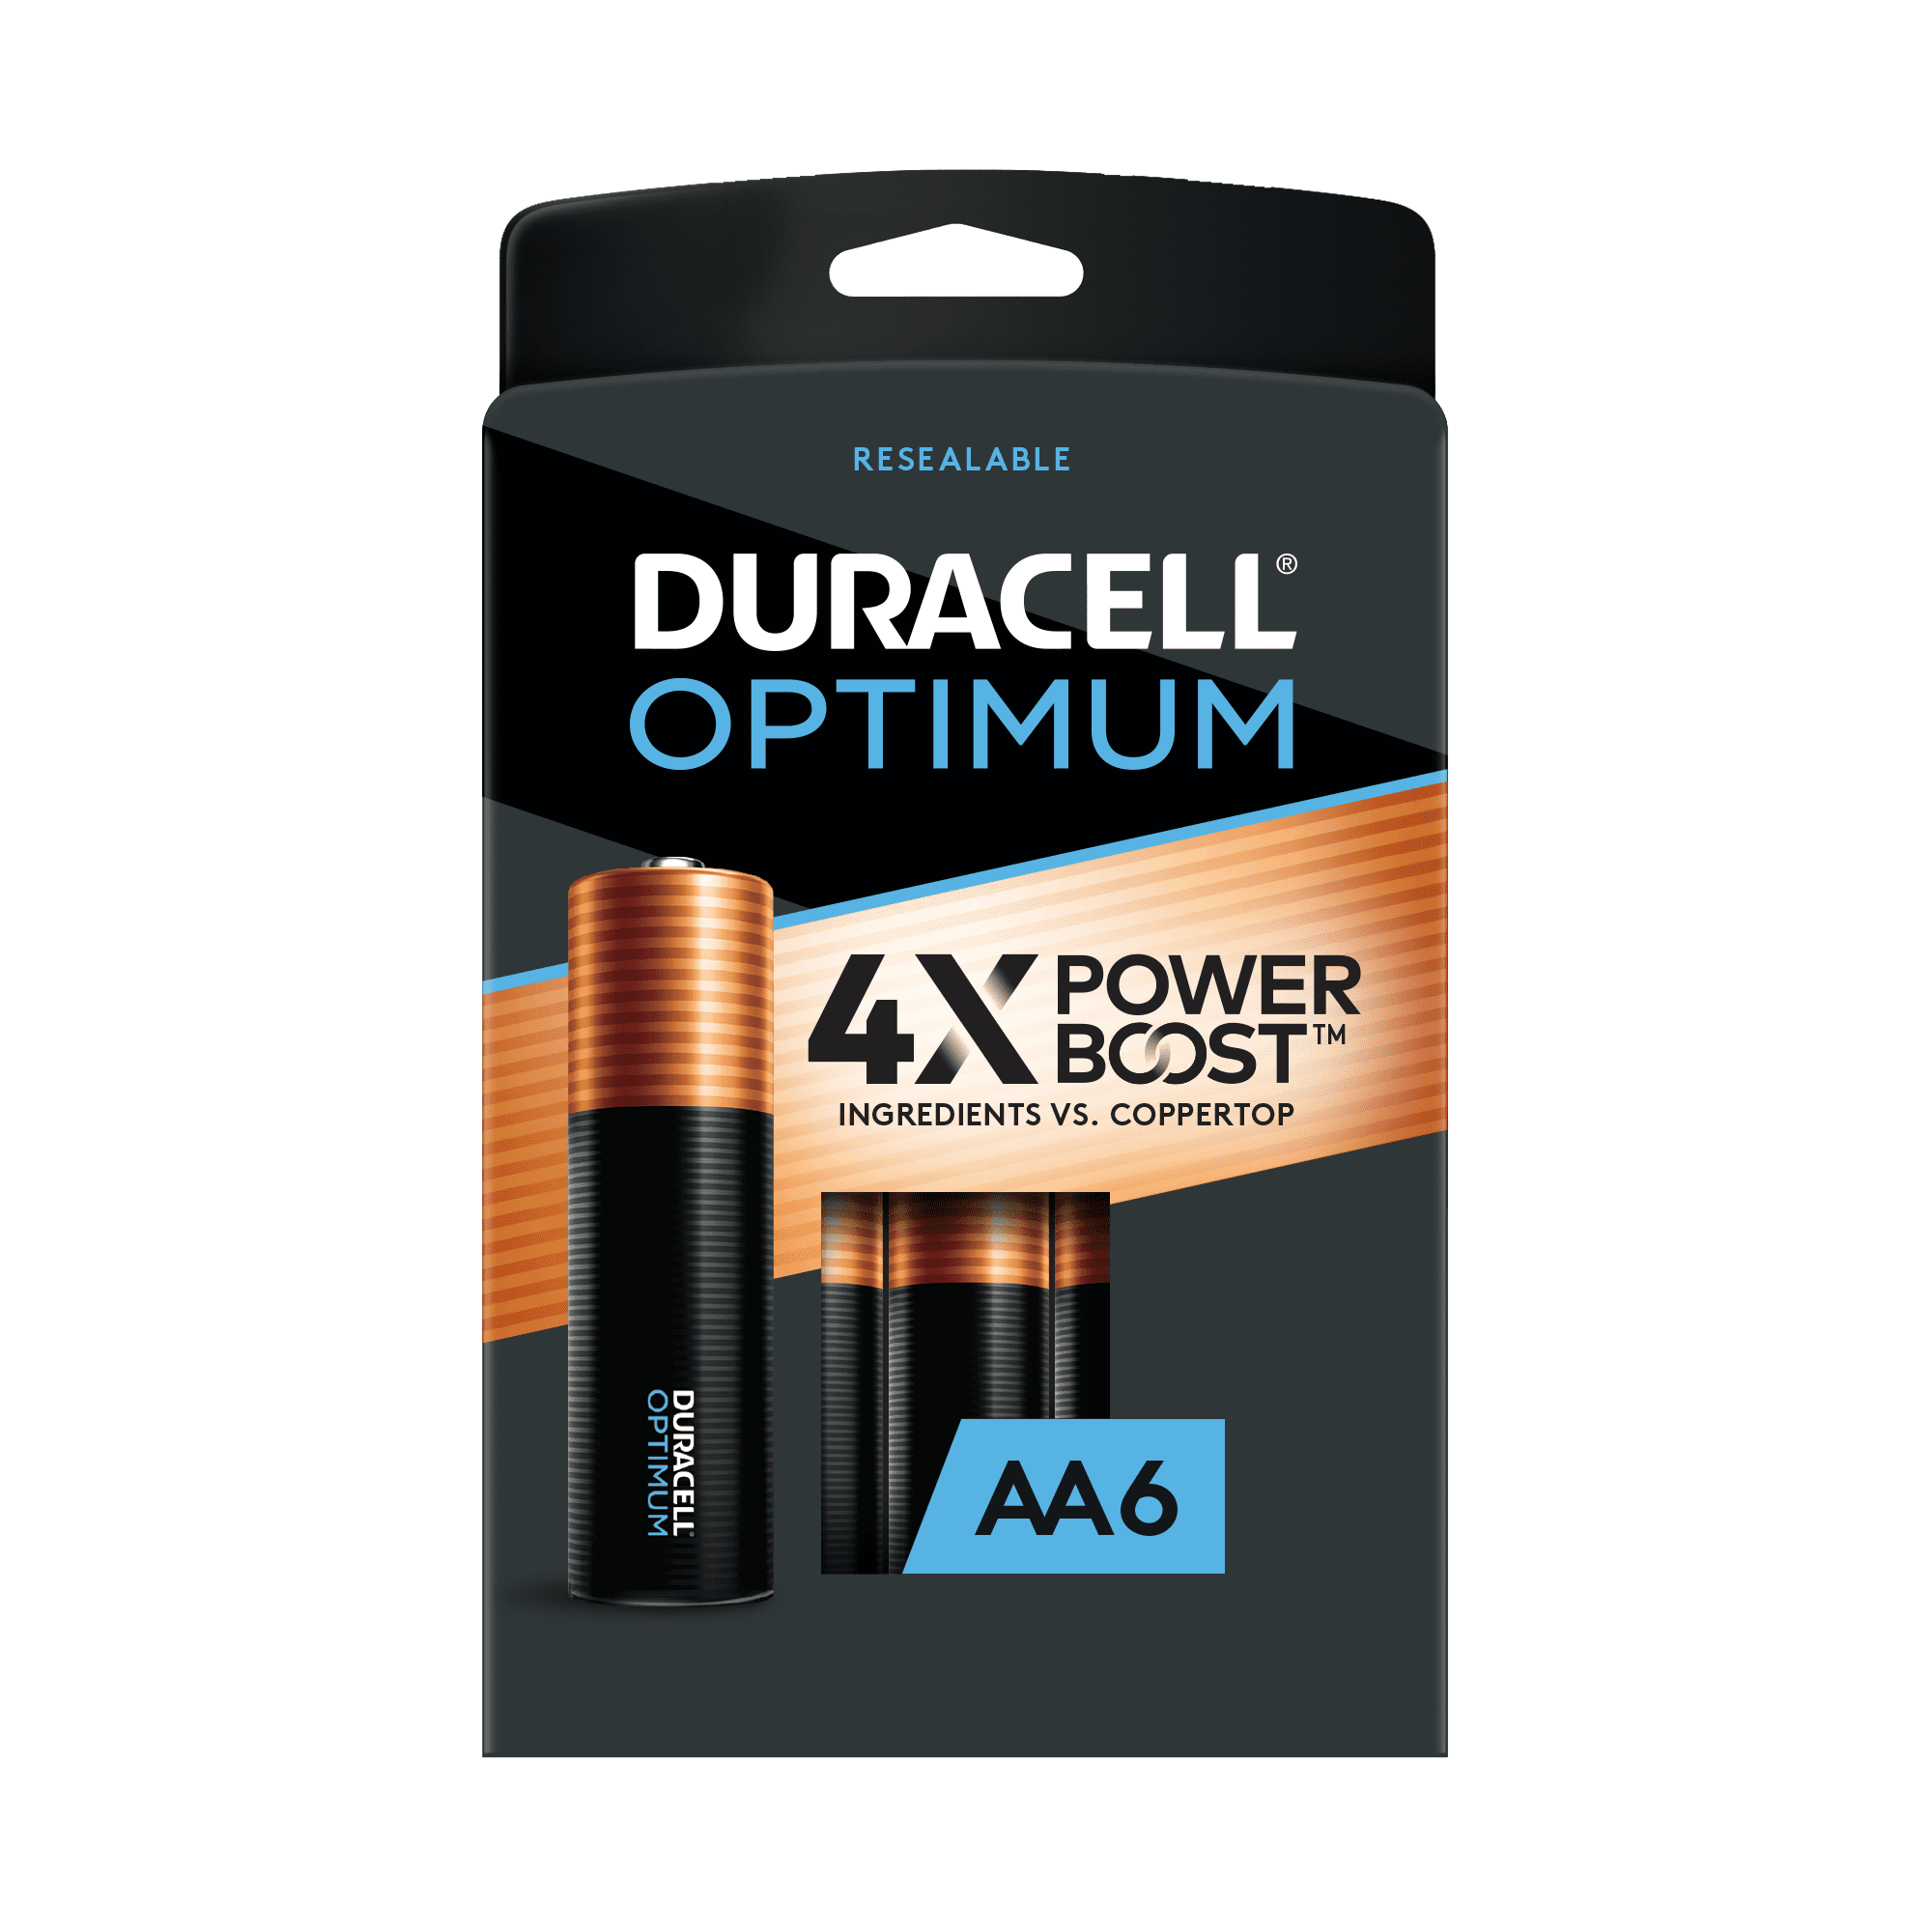 Duracell Optimum AA Battery with 4X POWER BOOST, 6 Pack Resealable Package